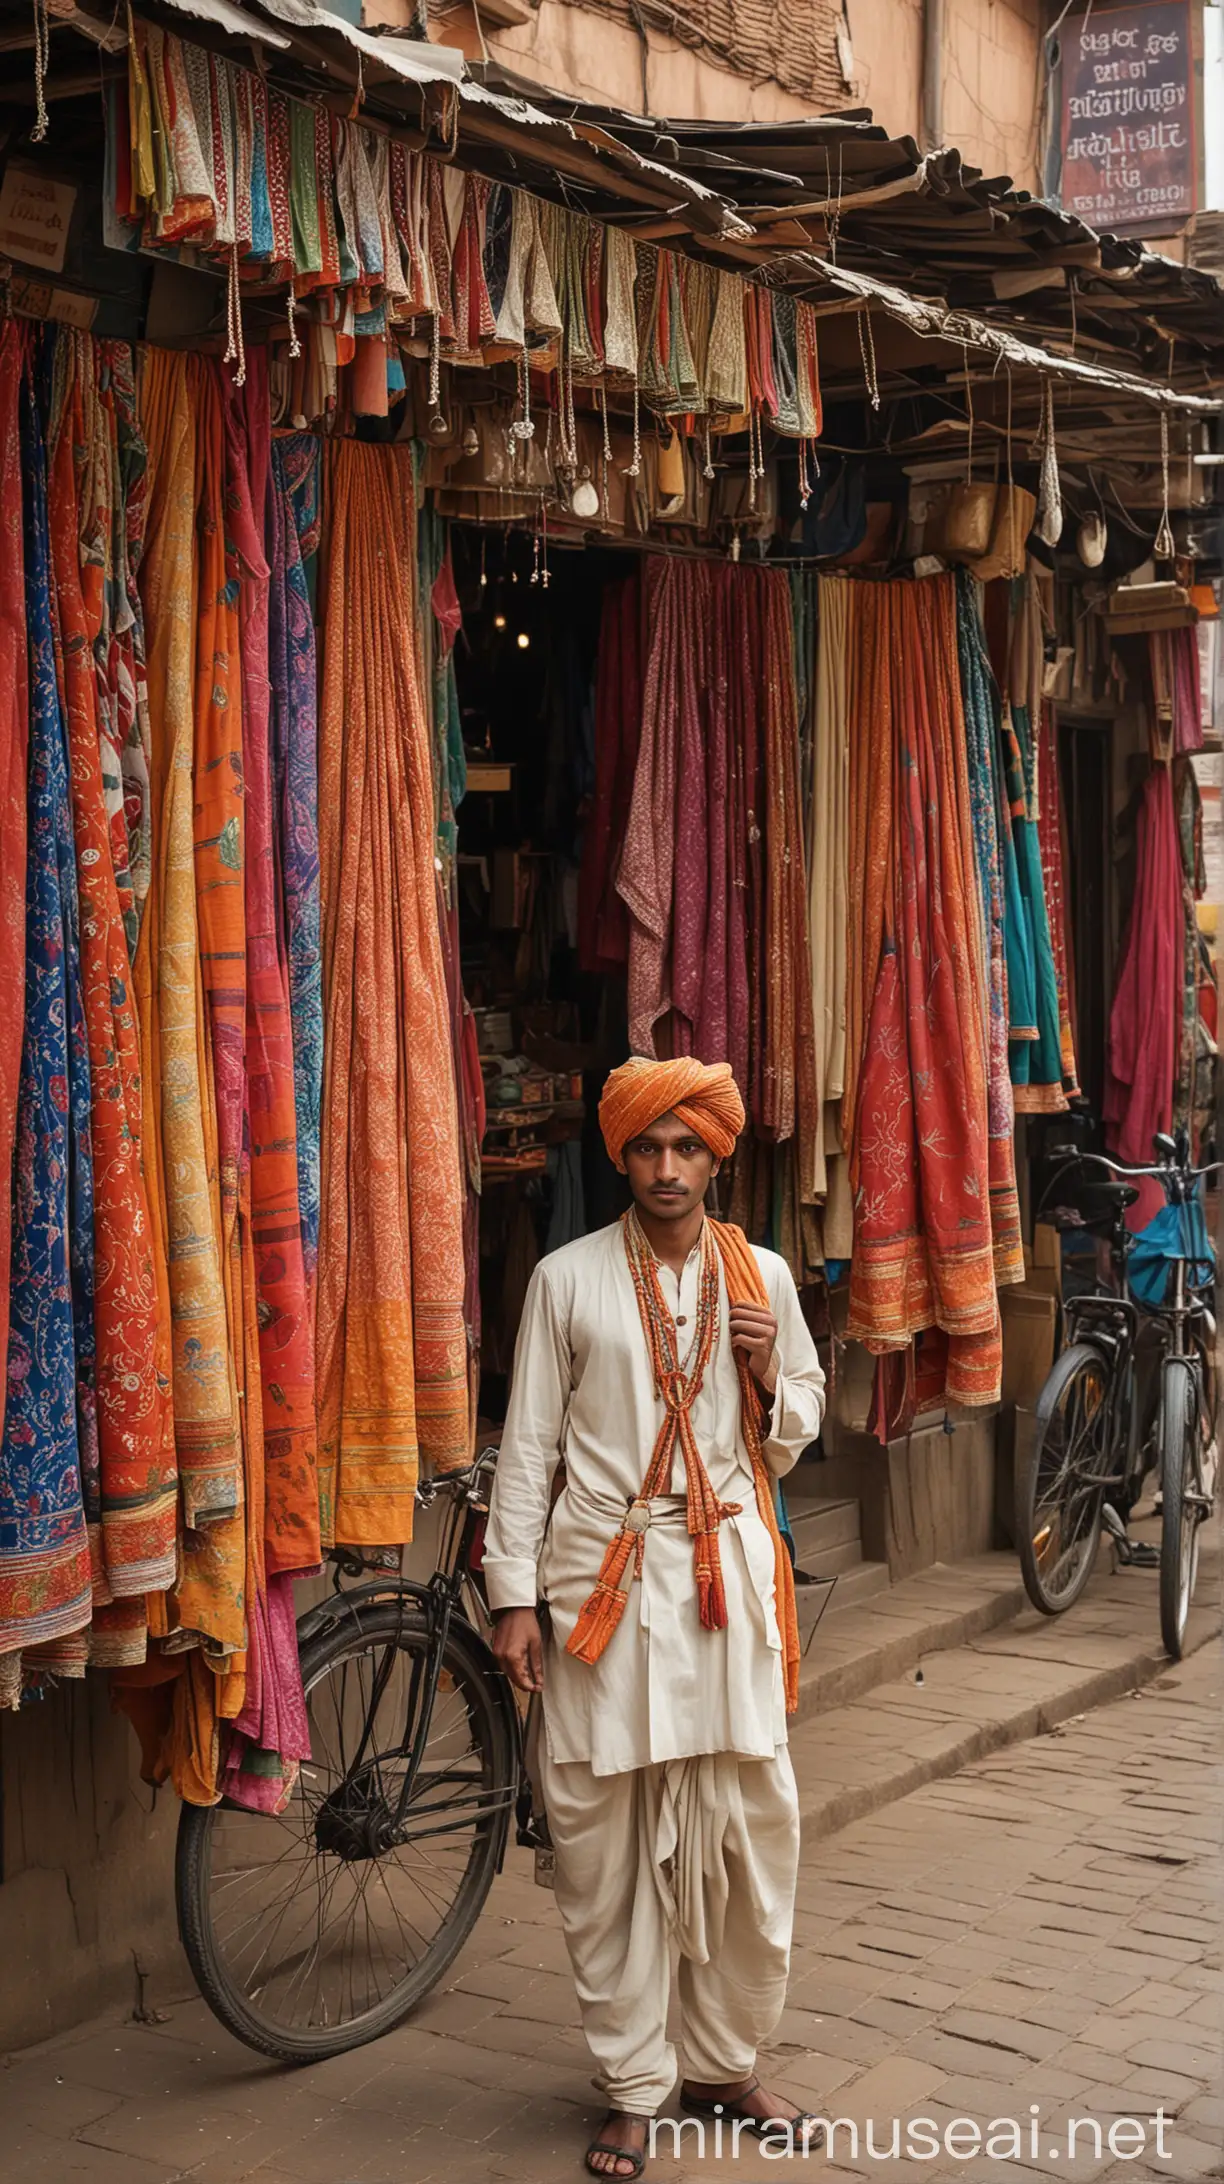 Confident Rajasthani Clothing Seller in 1970s Marketplace